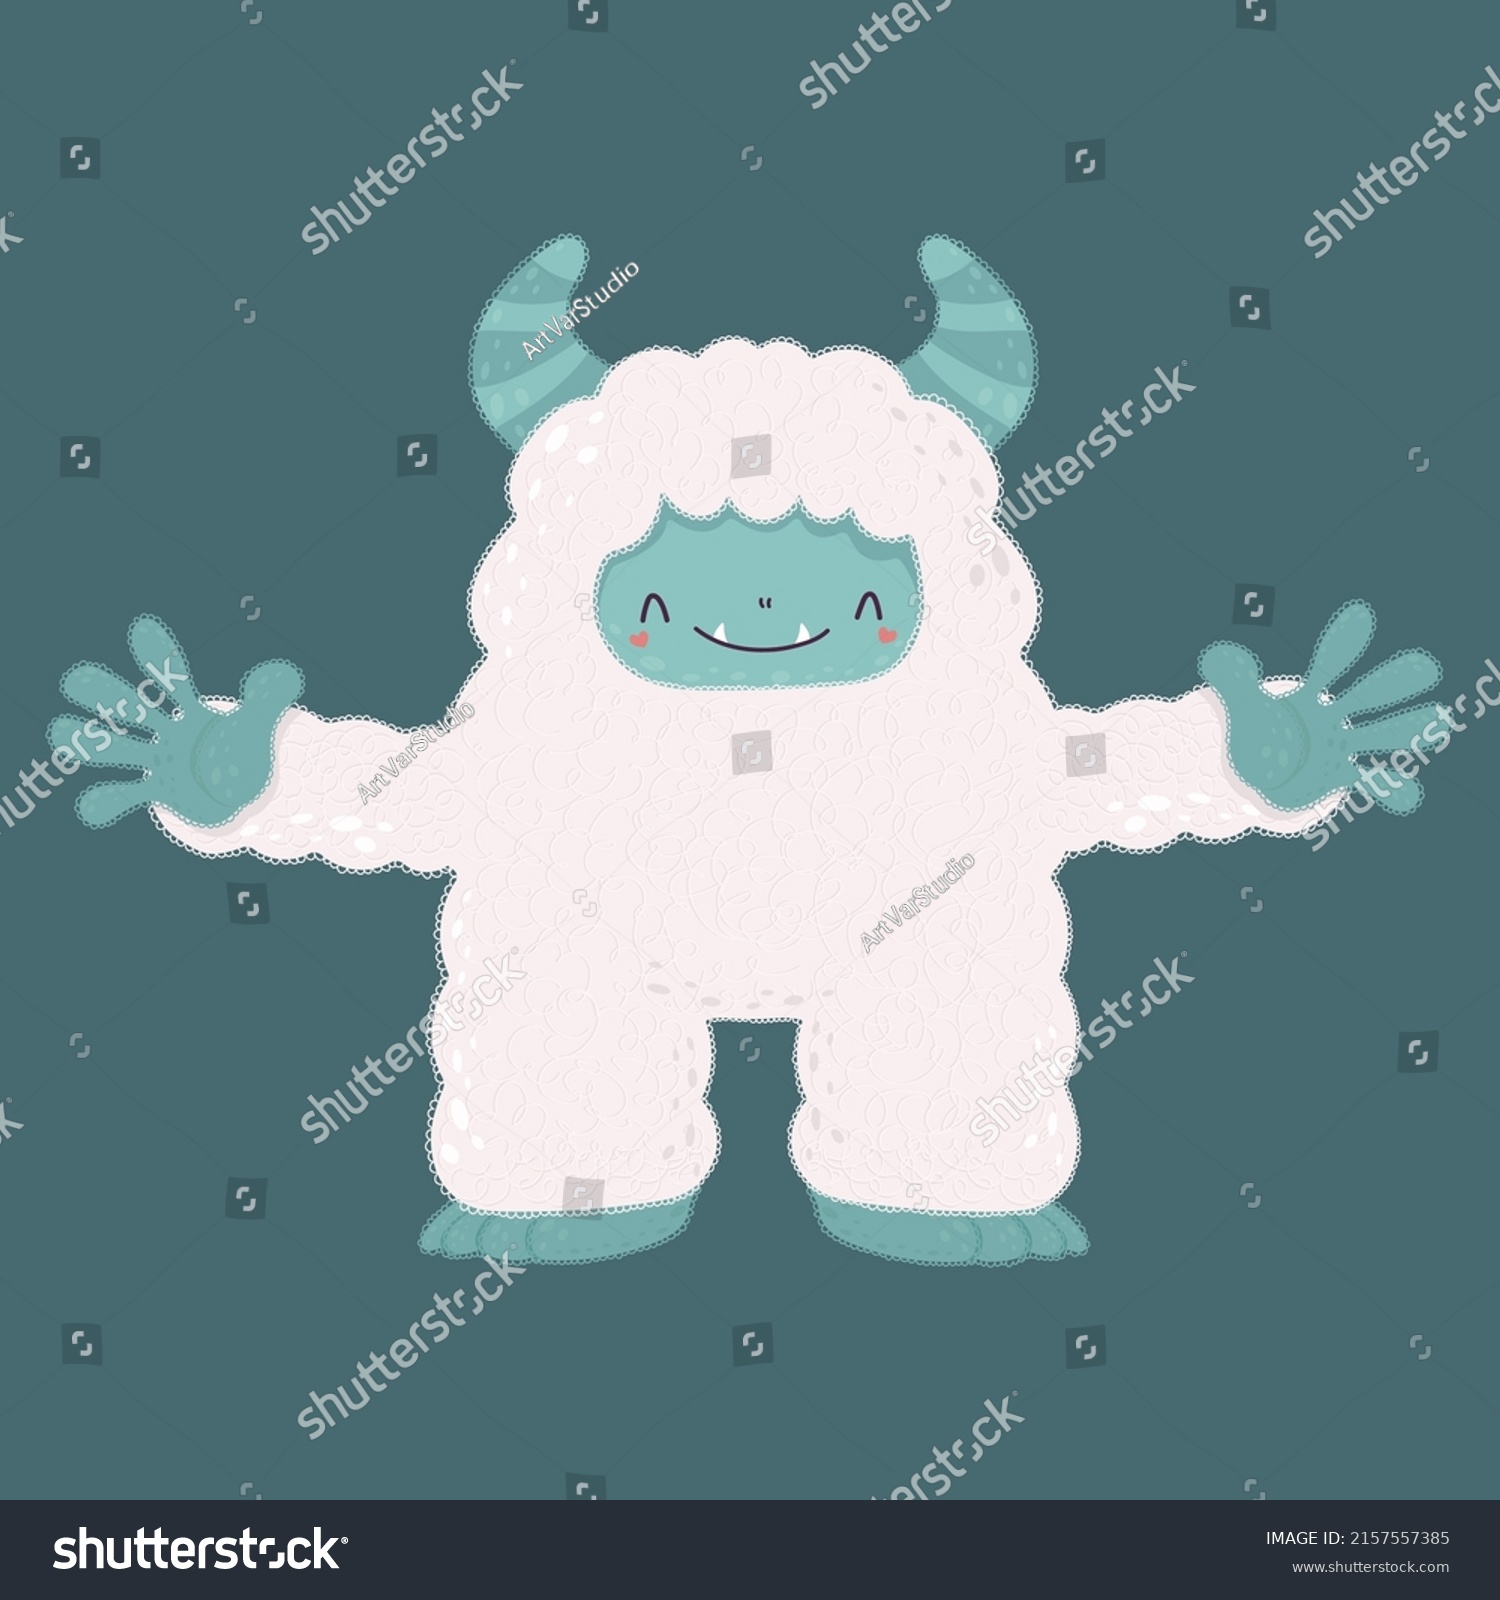 SVG of Funny monster yeti character. Vector illustration of a cute monster. Cute little illustration of yeti for kids, baby book, fairy tales, baby shower invitation, textile t-shirt, sticker. svg